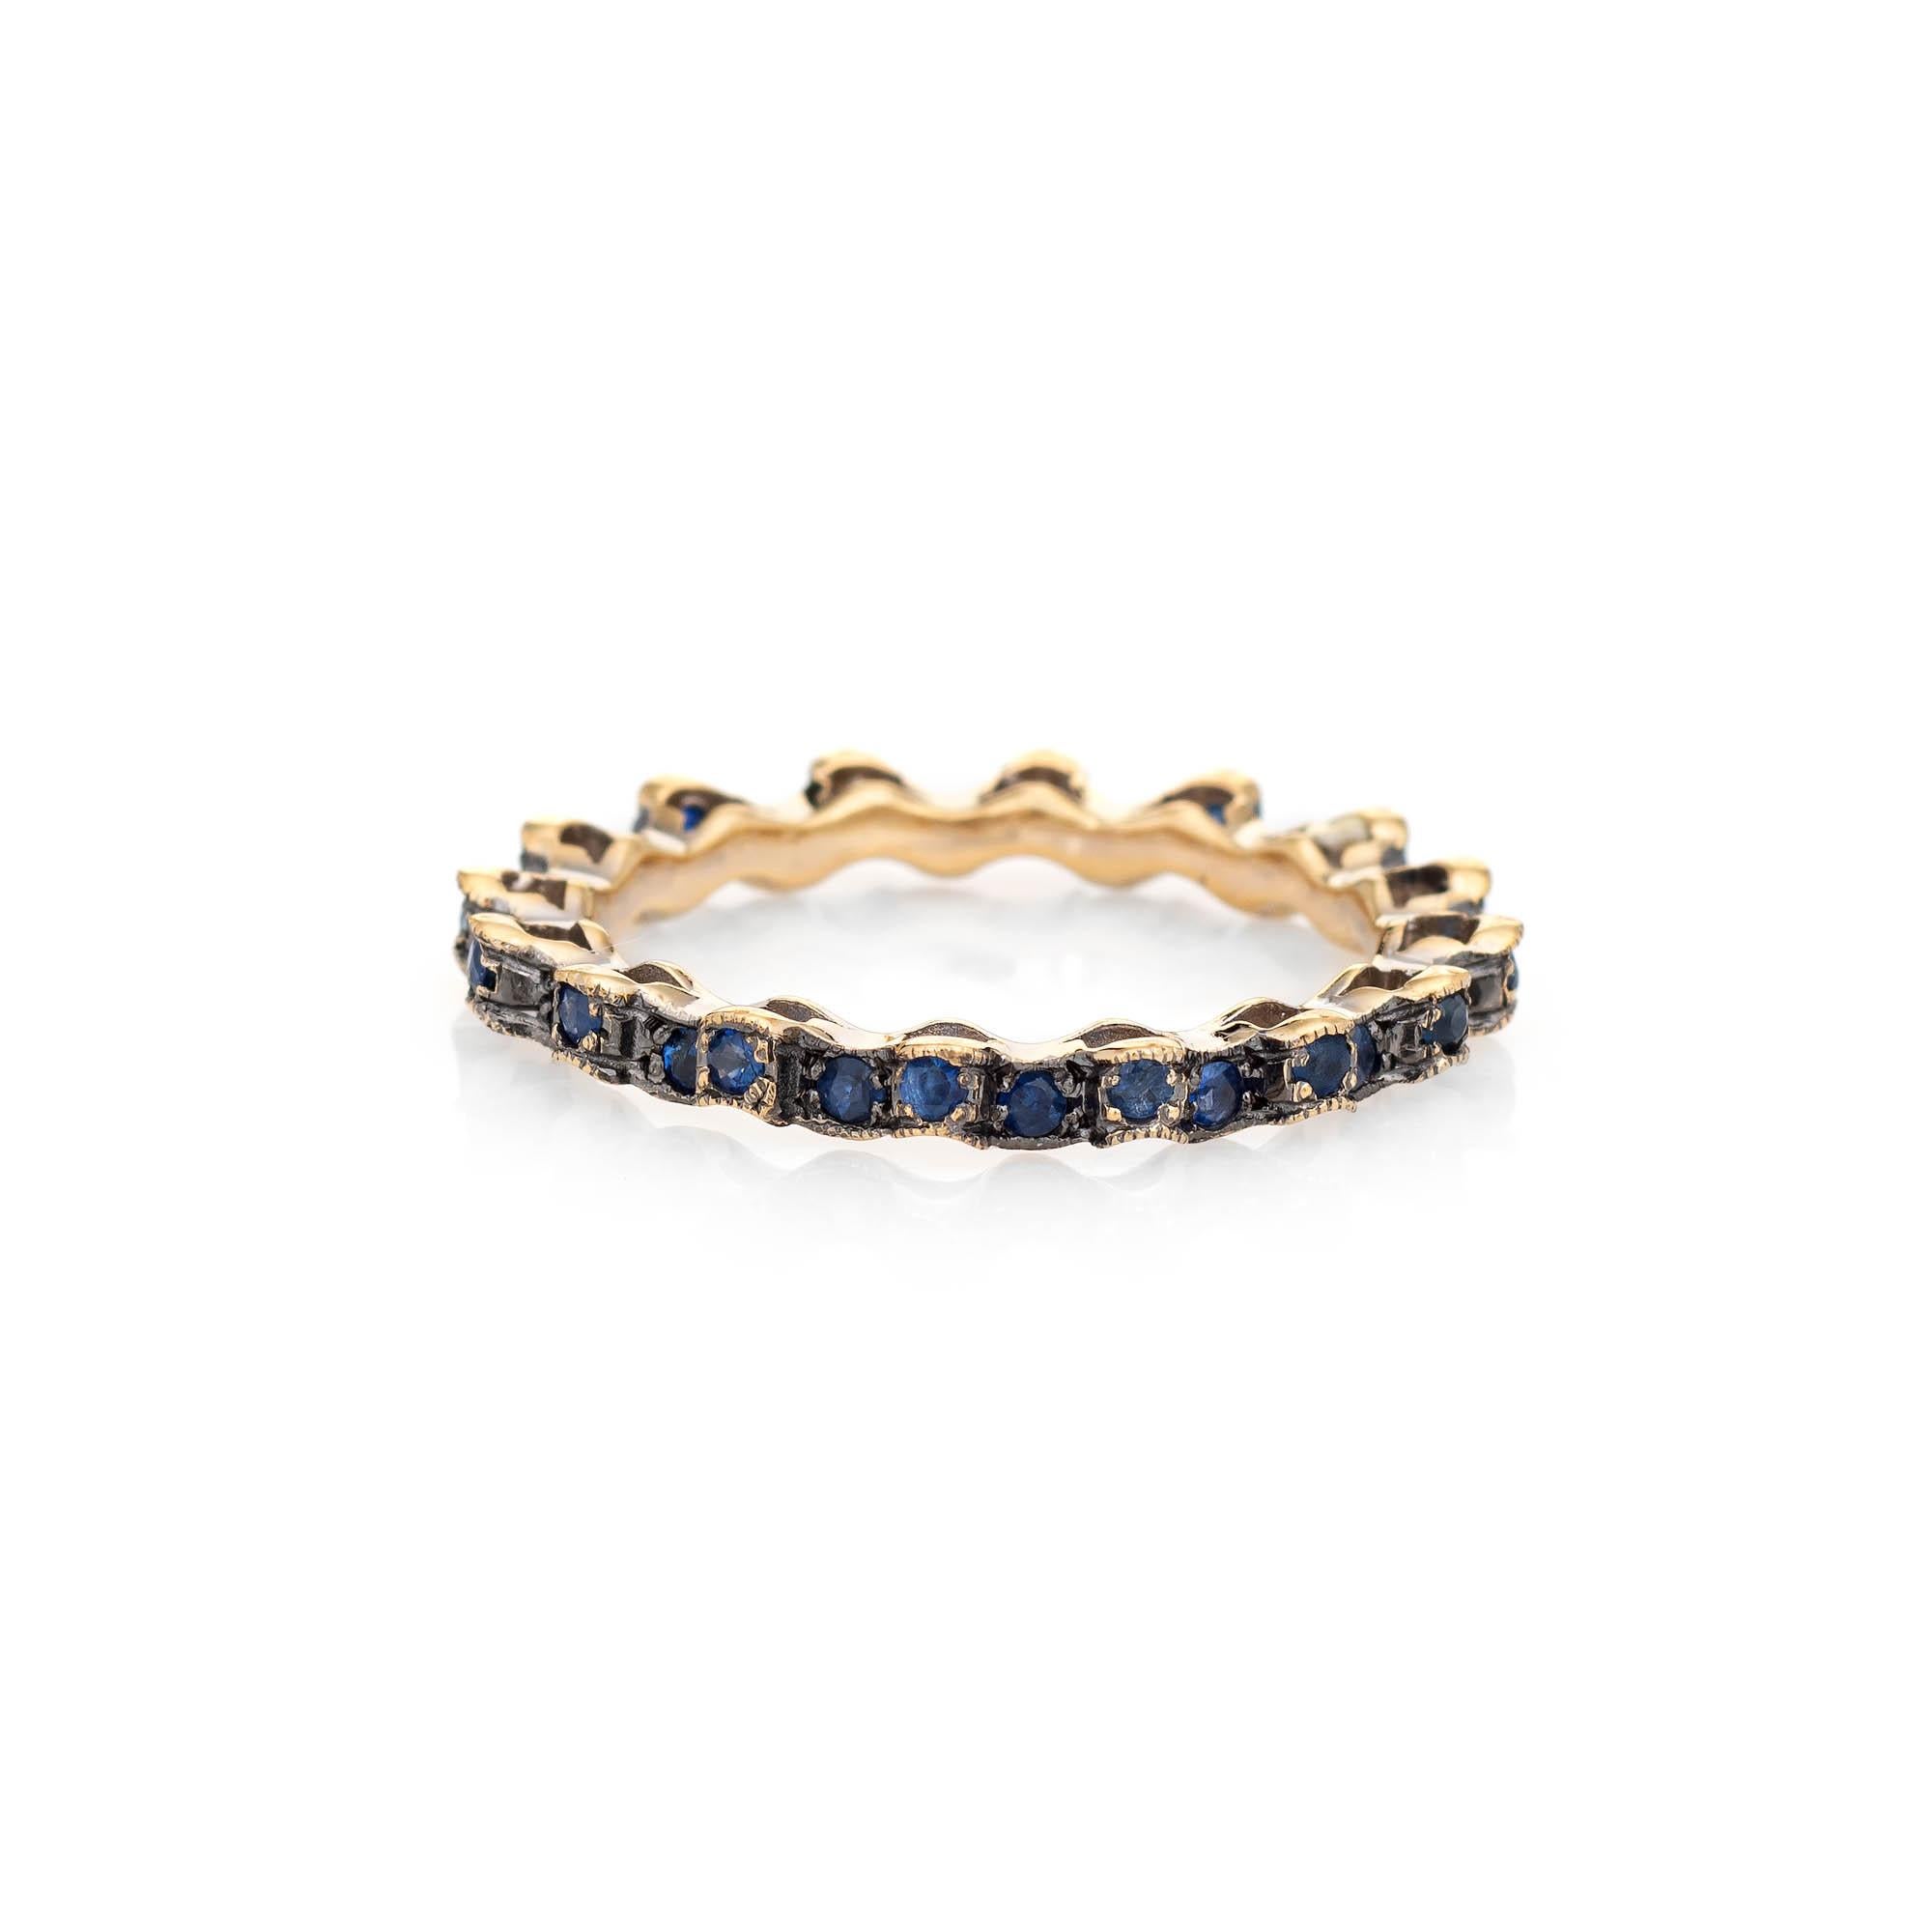 Stylish estate blue sapphire eternity ring crafted in 18 karat yellow gold. 

Blue sapphires total an estimated 0.64 carats. The sapphires are in excellent condition and free of cracks or chips. 

The unique ring features a wavy undulating design